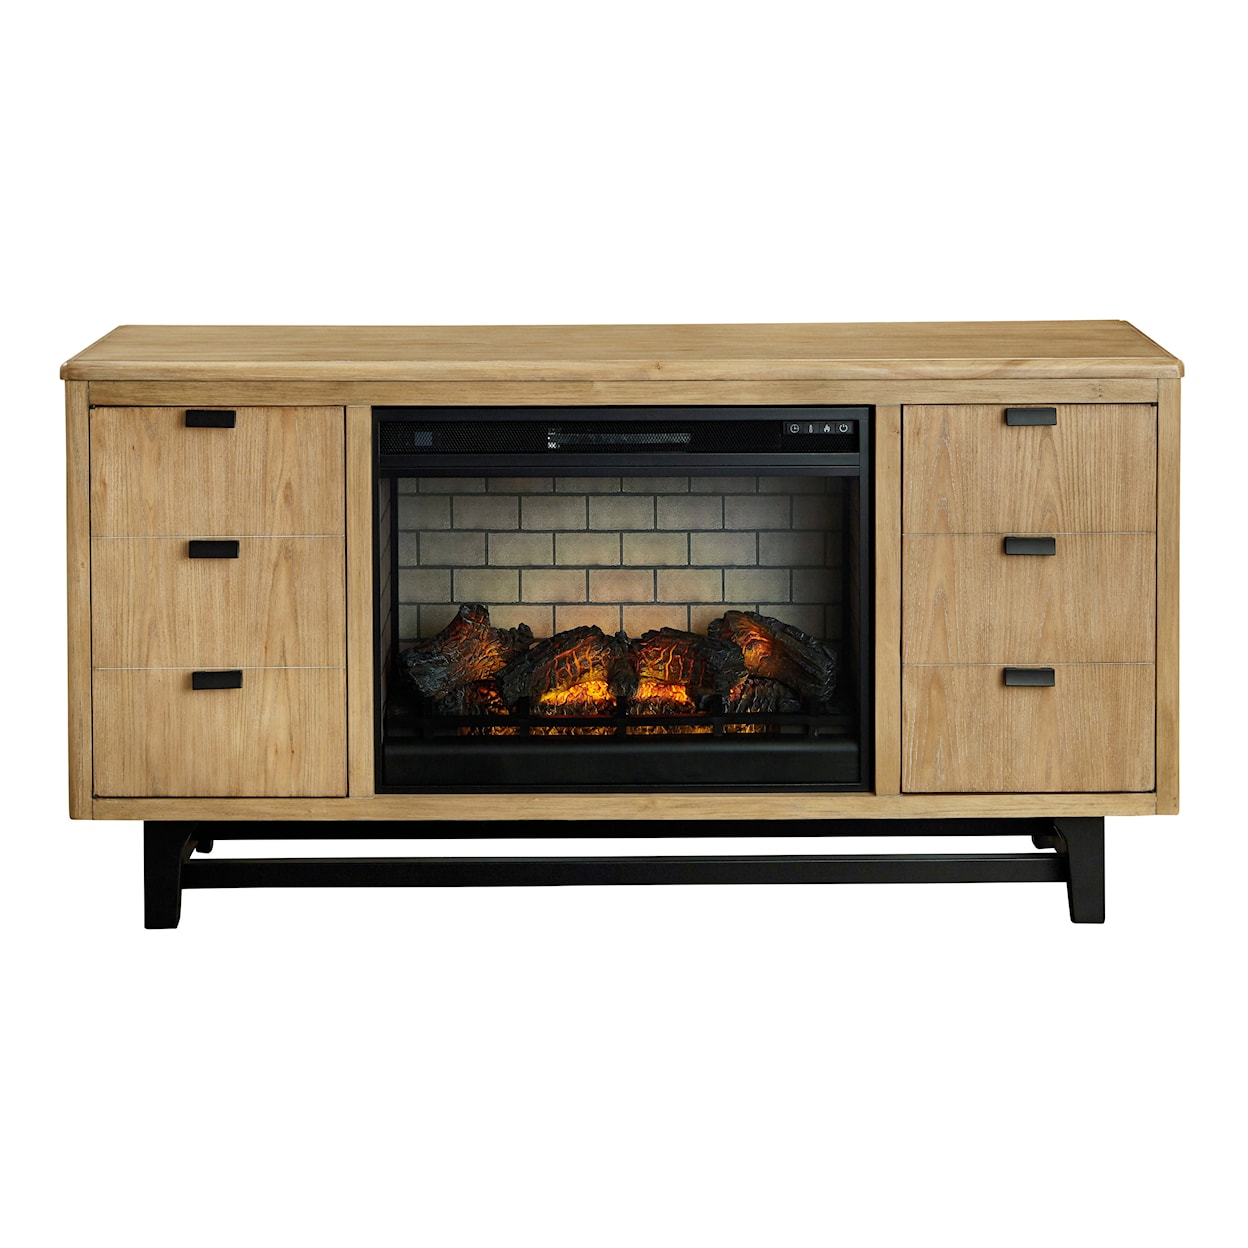 Benchcraft Freslowe Large TV Stand with Fireplace